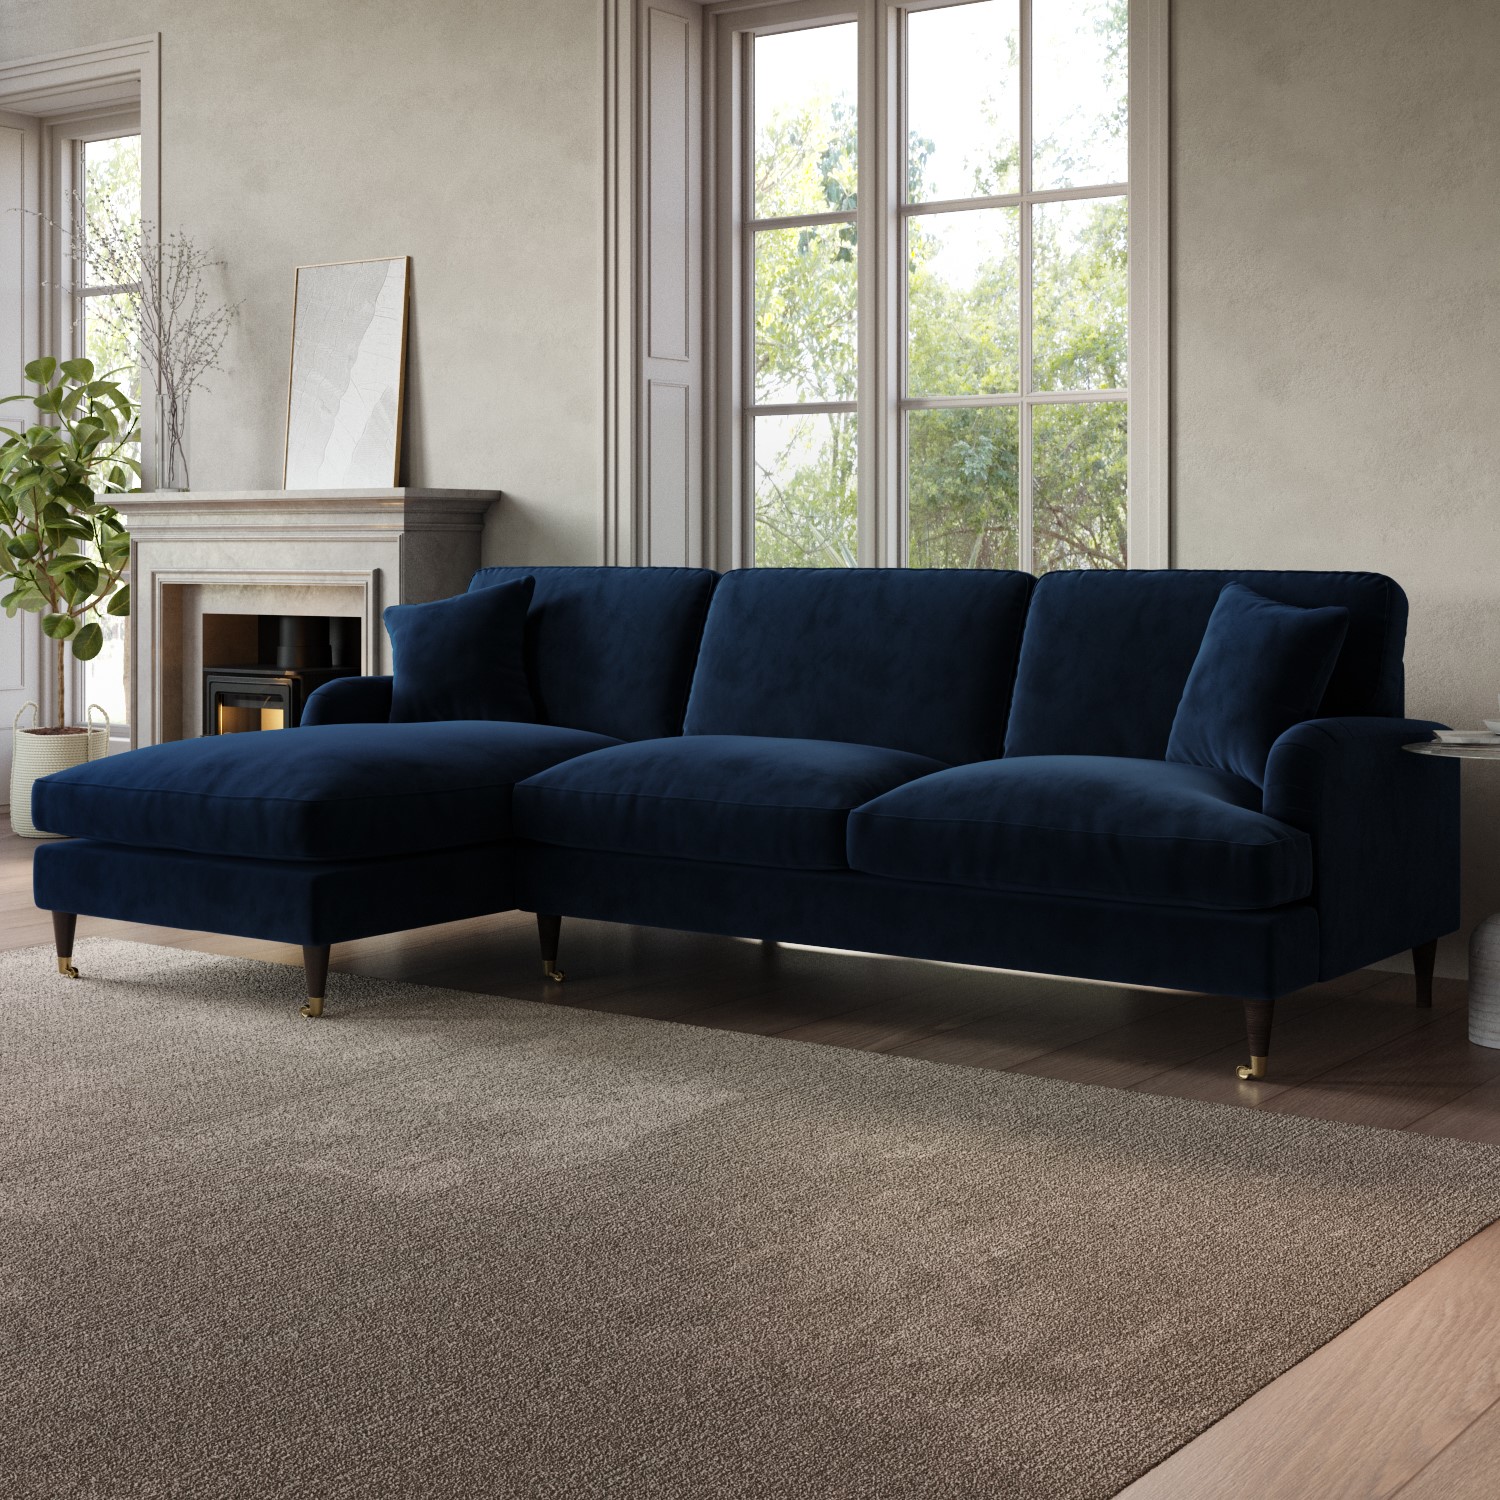 Read more about Navy velvet left hand facing l shaped sofa seats 4 payton